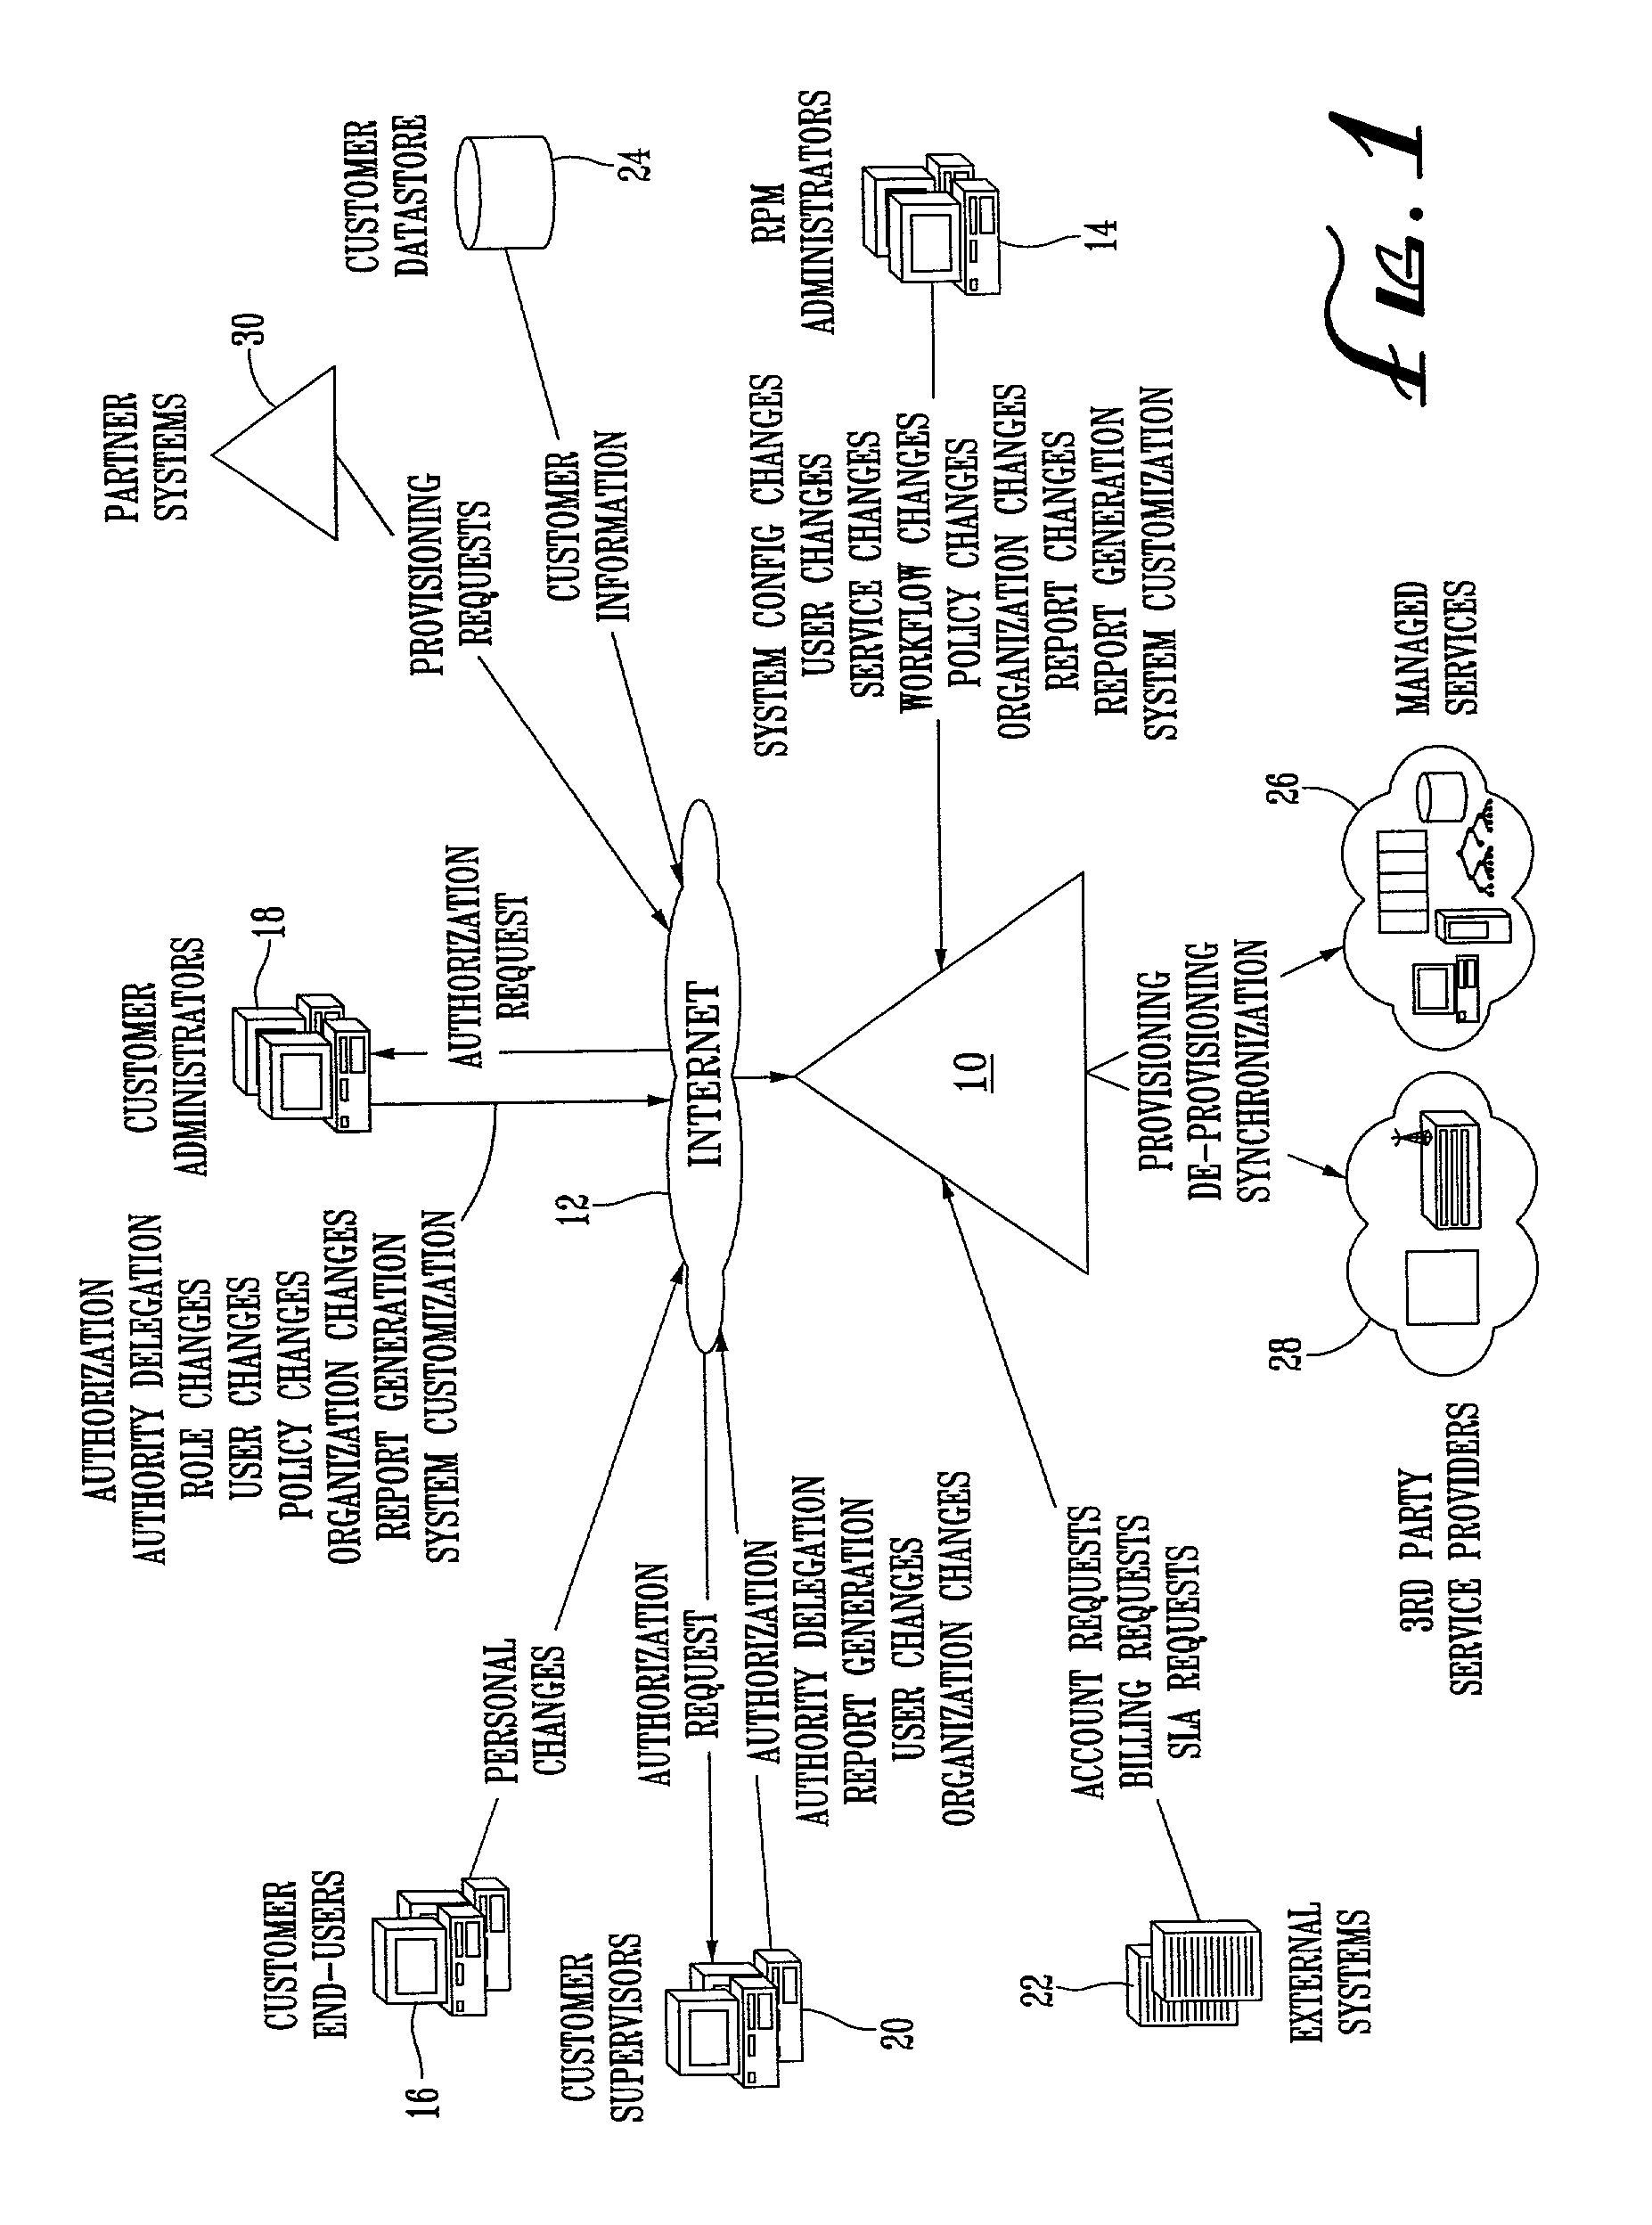 System and method for provisioning resources to users based on roles, organizational information, attributes and third-party information or authorizations